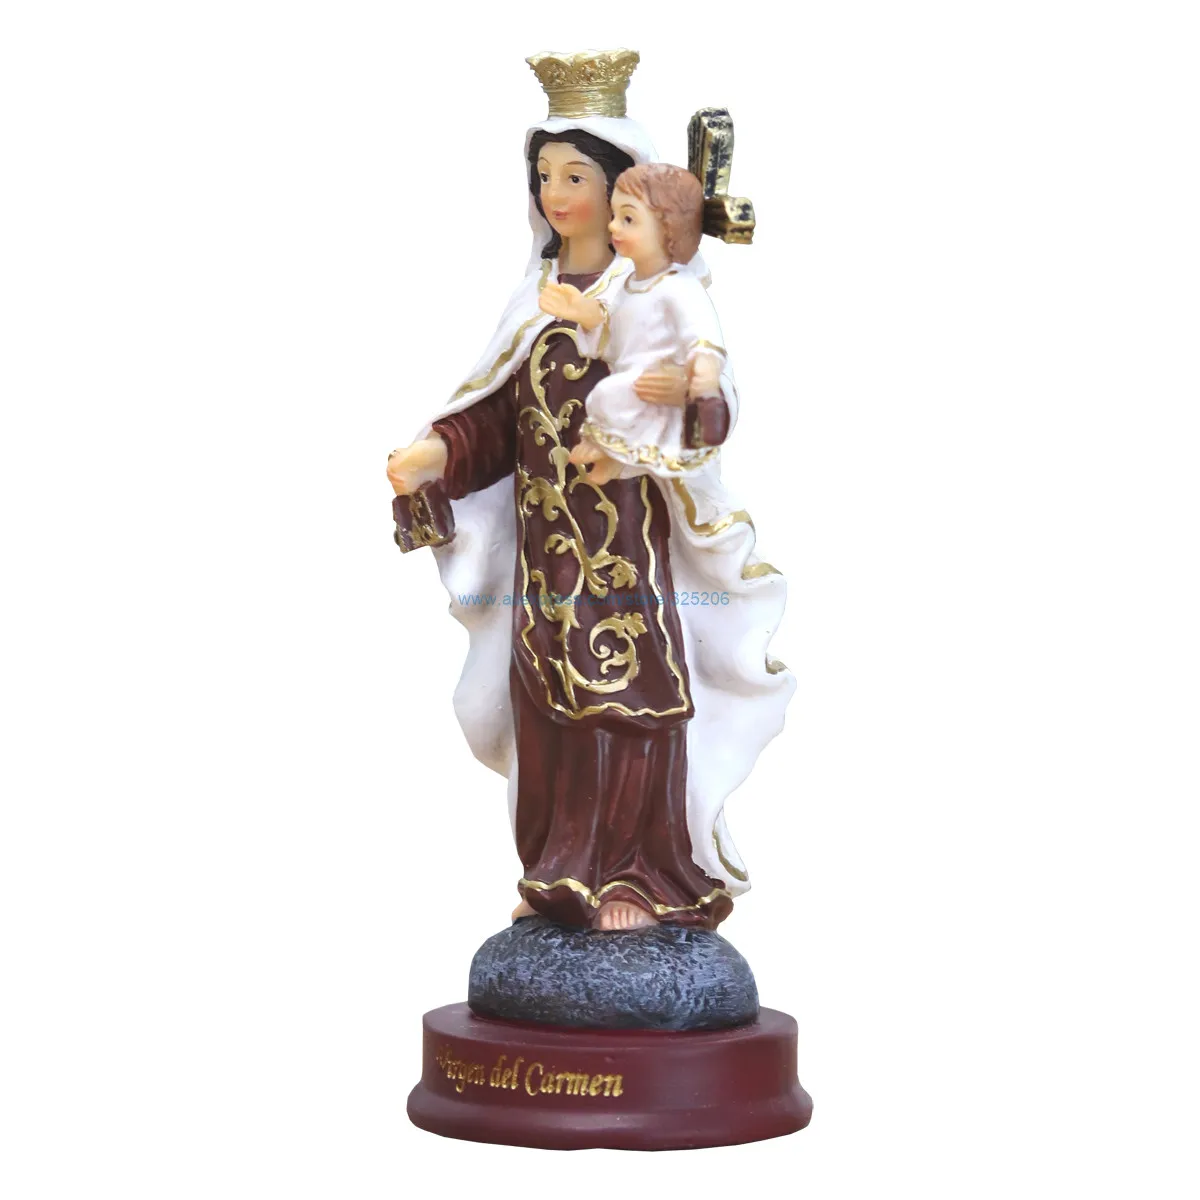 

Our Lady of Mount Carmel Virgin Mary Statue Catholic Decorative Statuary Figure Sculpture Gifts 14cm 5.5inch NEW